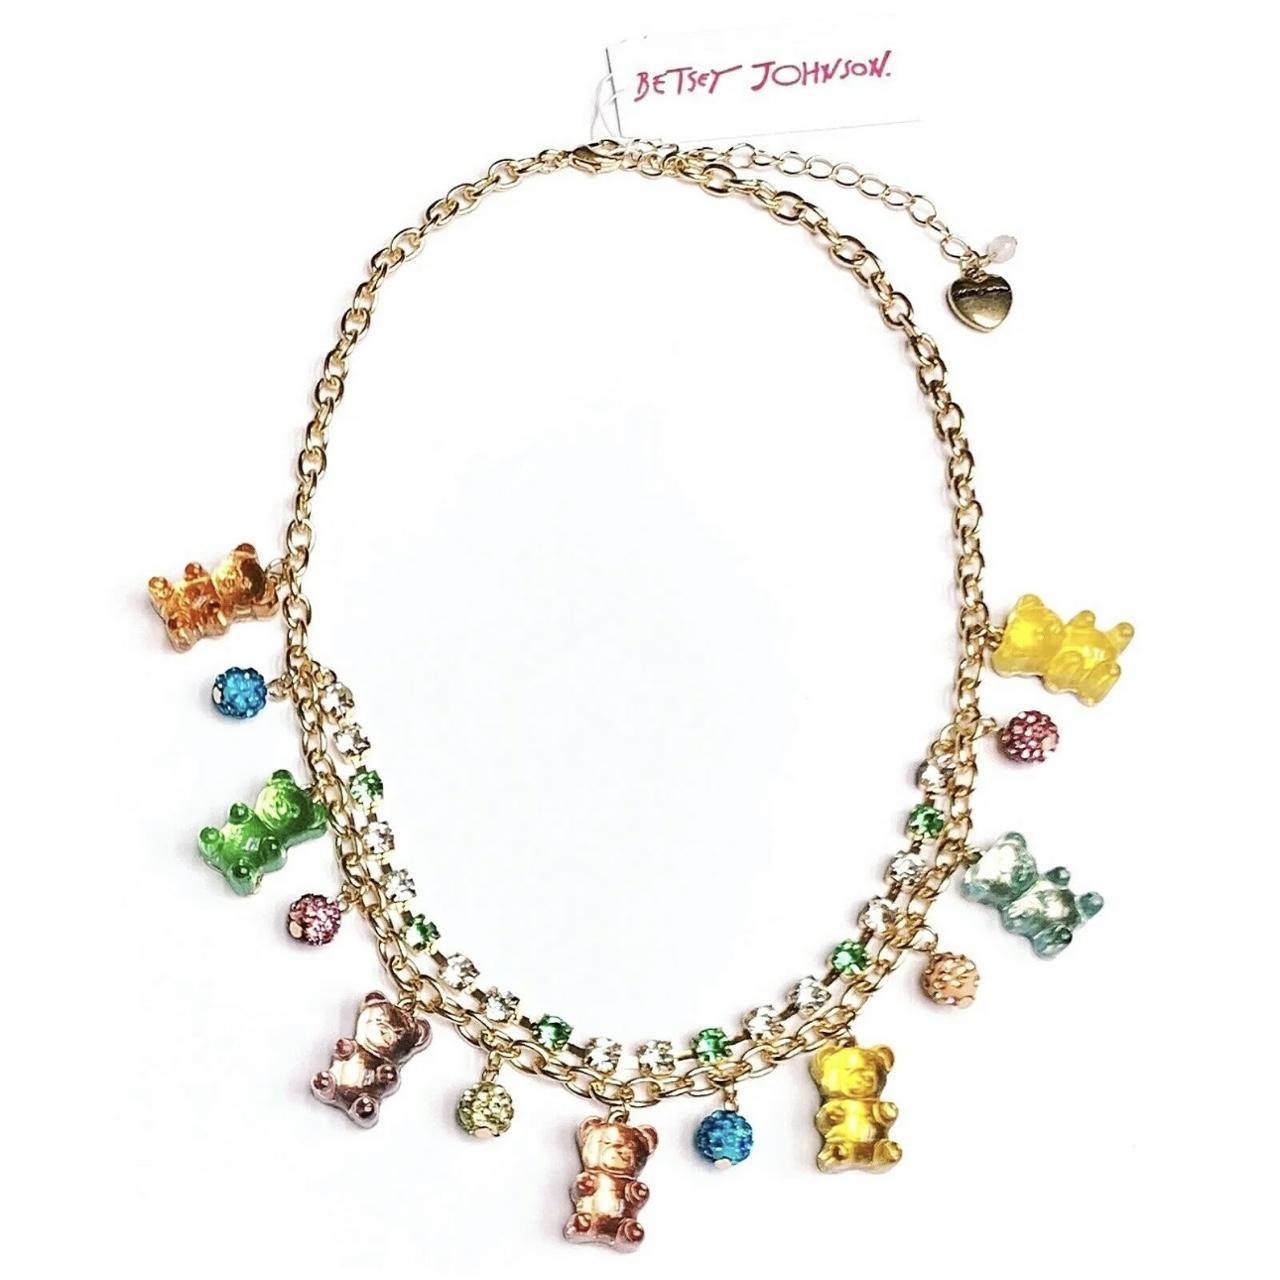 BETSEY JOHNSON PASTEL Gummy Bears With Bling Necklace $51.99 - PicClick